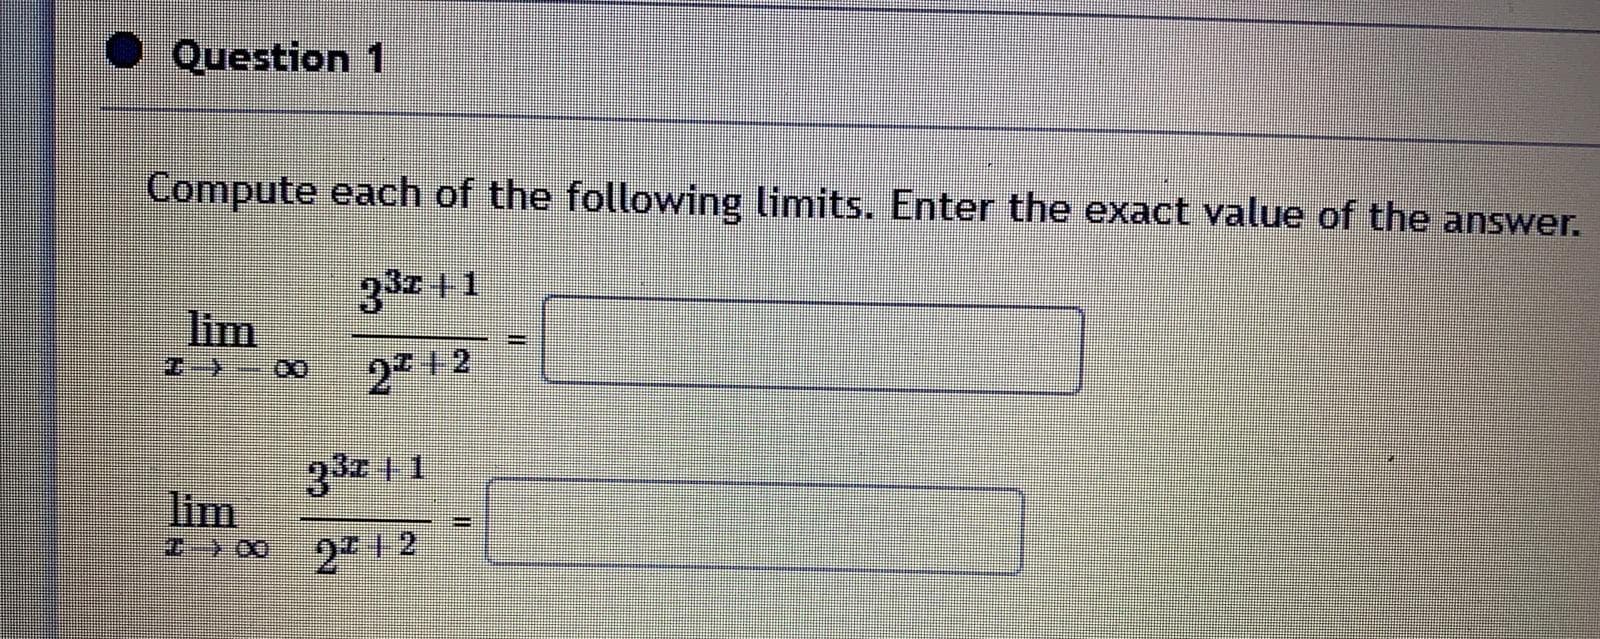 Compute each of the following limits. Enter the exact value of the answer.
33z + 1
lim
